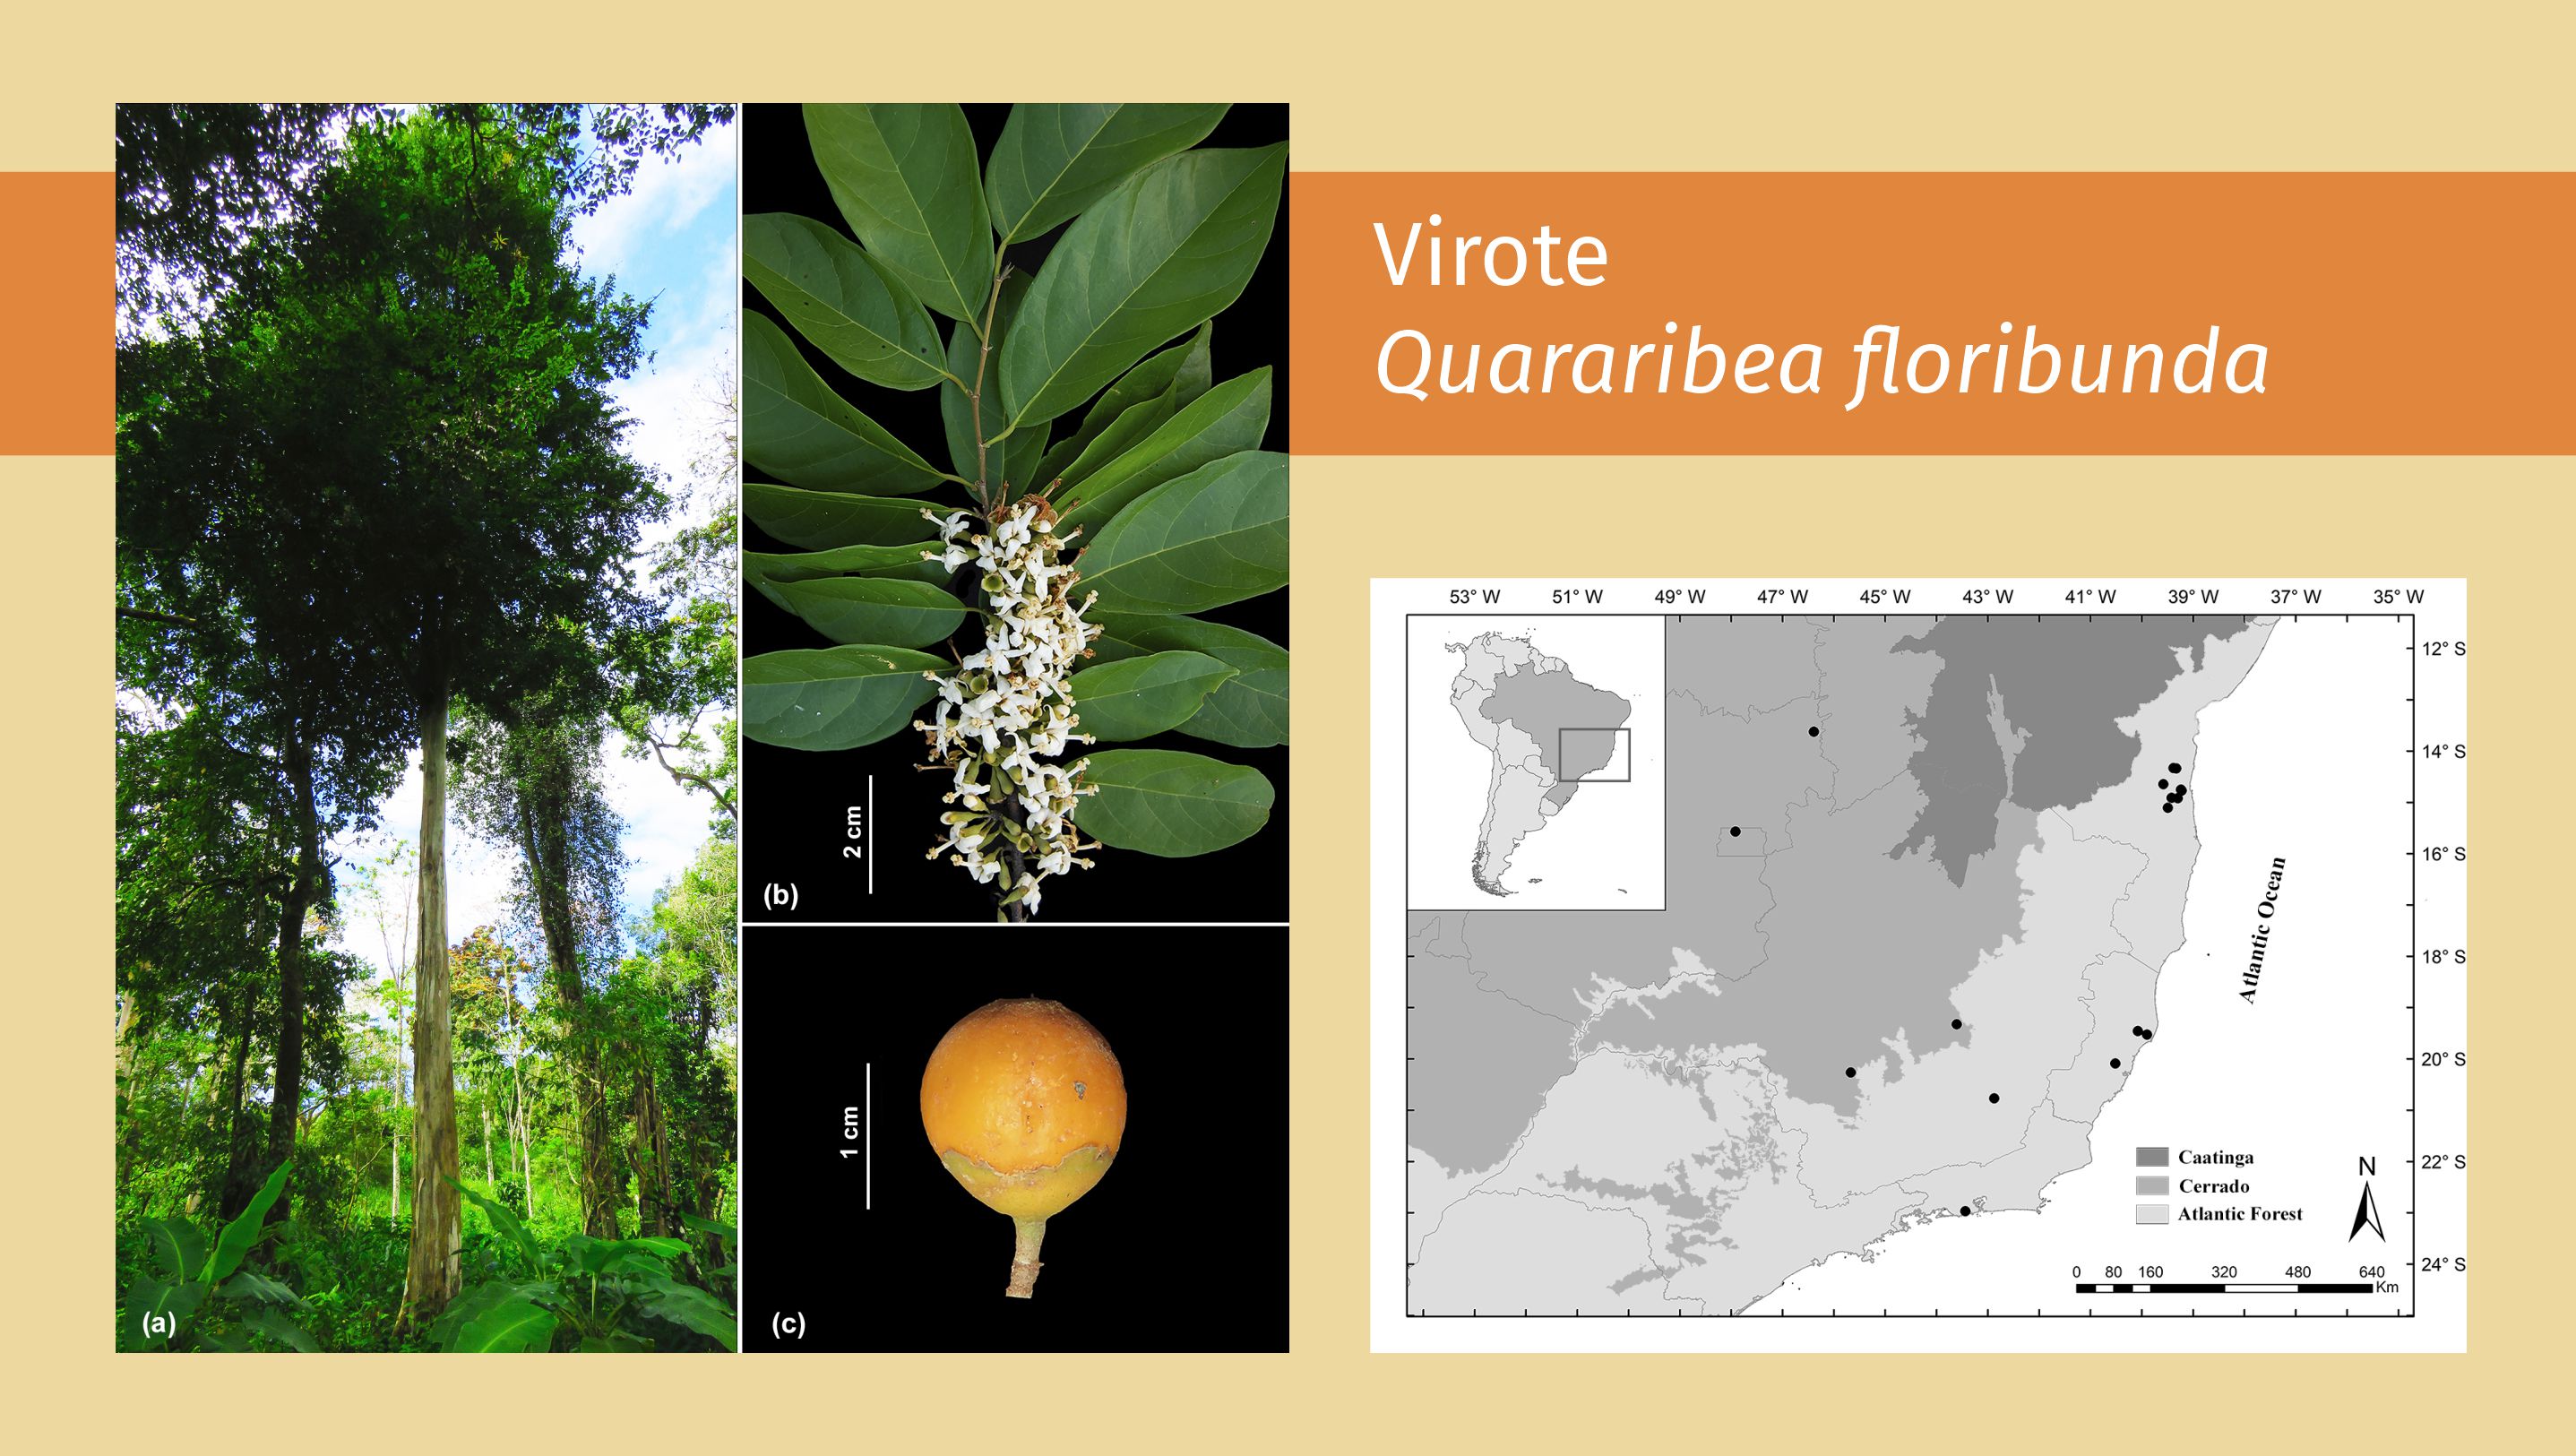 Researchers discover new details about a tree endemic to Brazil